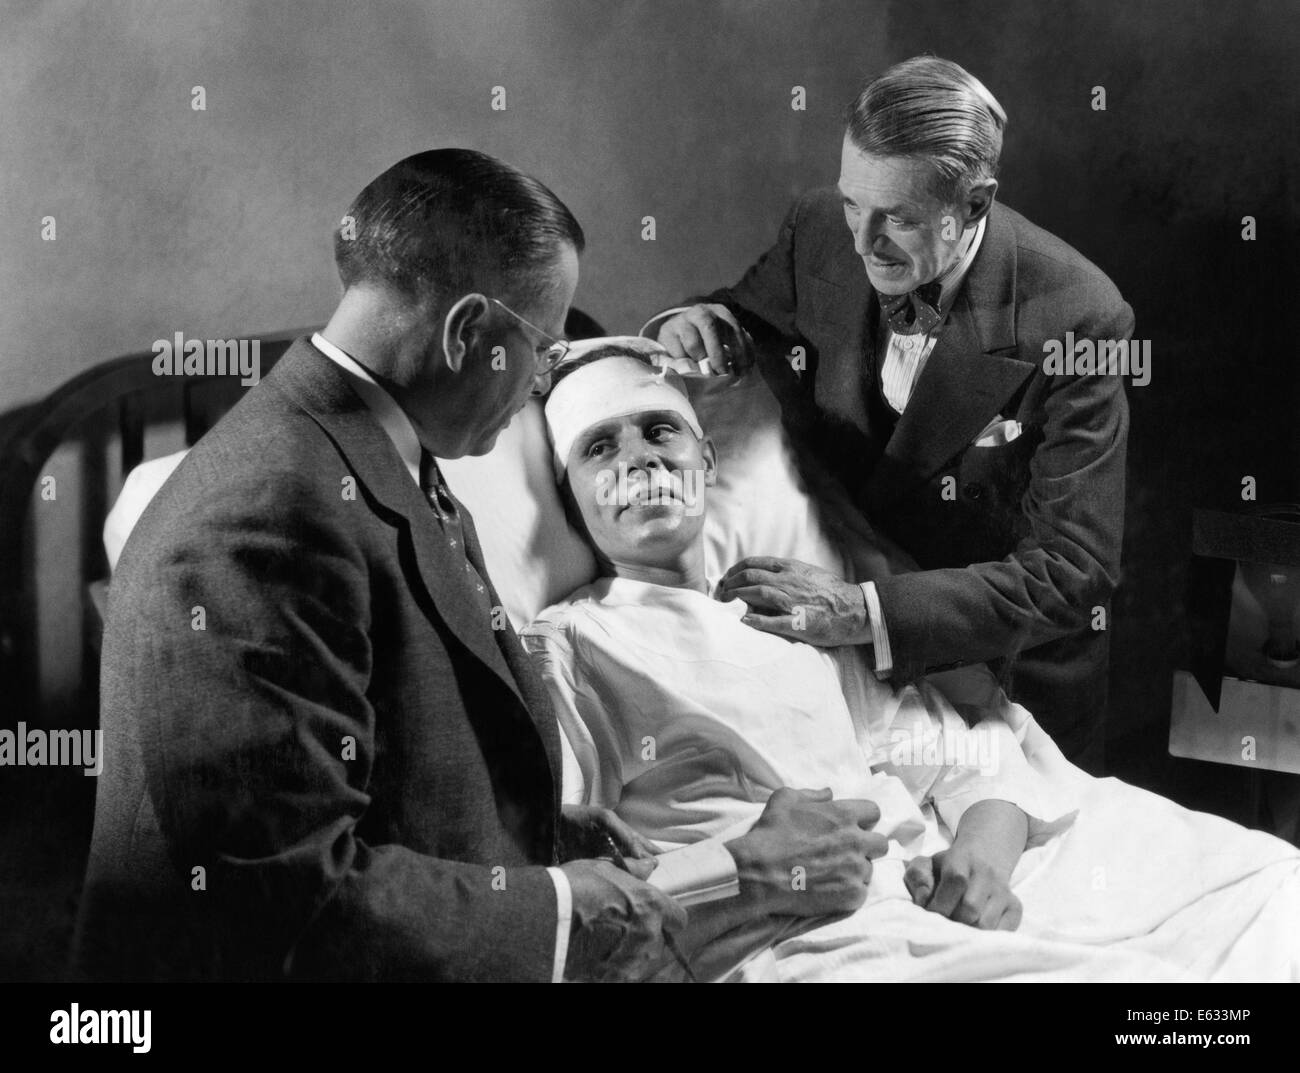 1940s MALE PATIENT HOSPITAL BED HEAD WRAPPED BANDAGE BEING ATTENDED TO BY TWO MEN DOCTORS Stock Photo